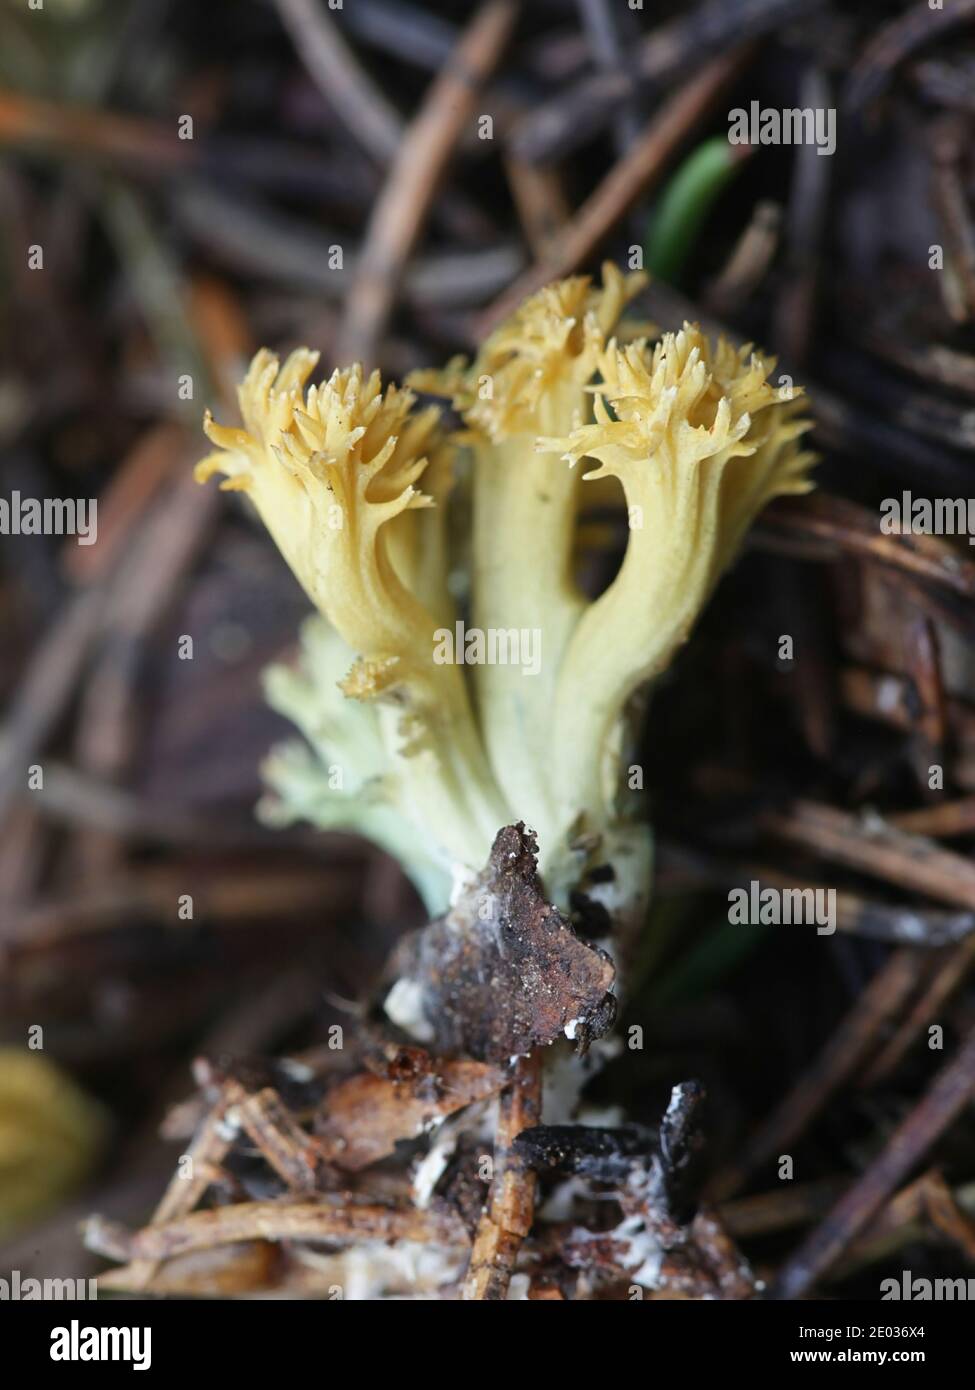 Ramaria abietina, also konown as Phaeoclavulina abietina, the green-staining coral or greening coral fungus, wild mushroom from Finland Stock Photo